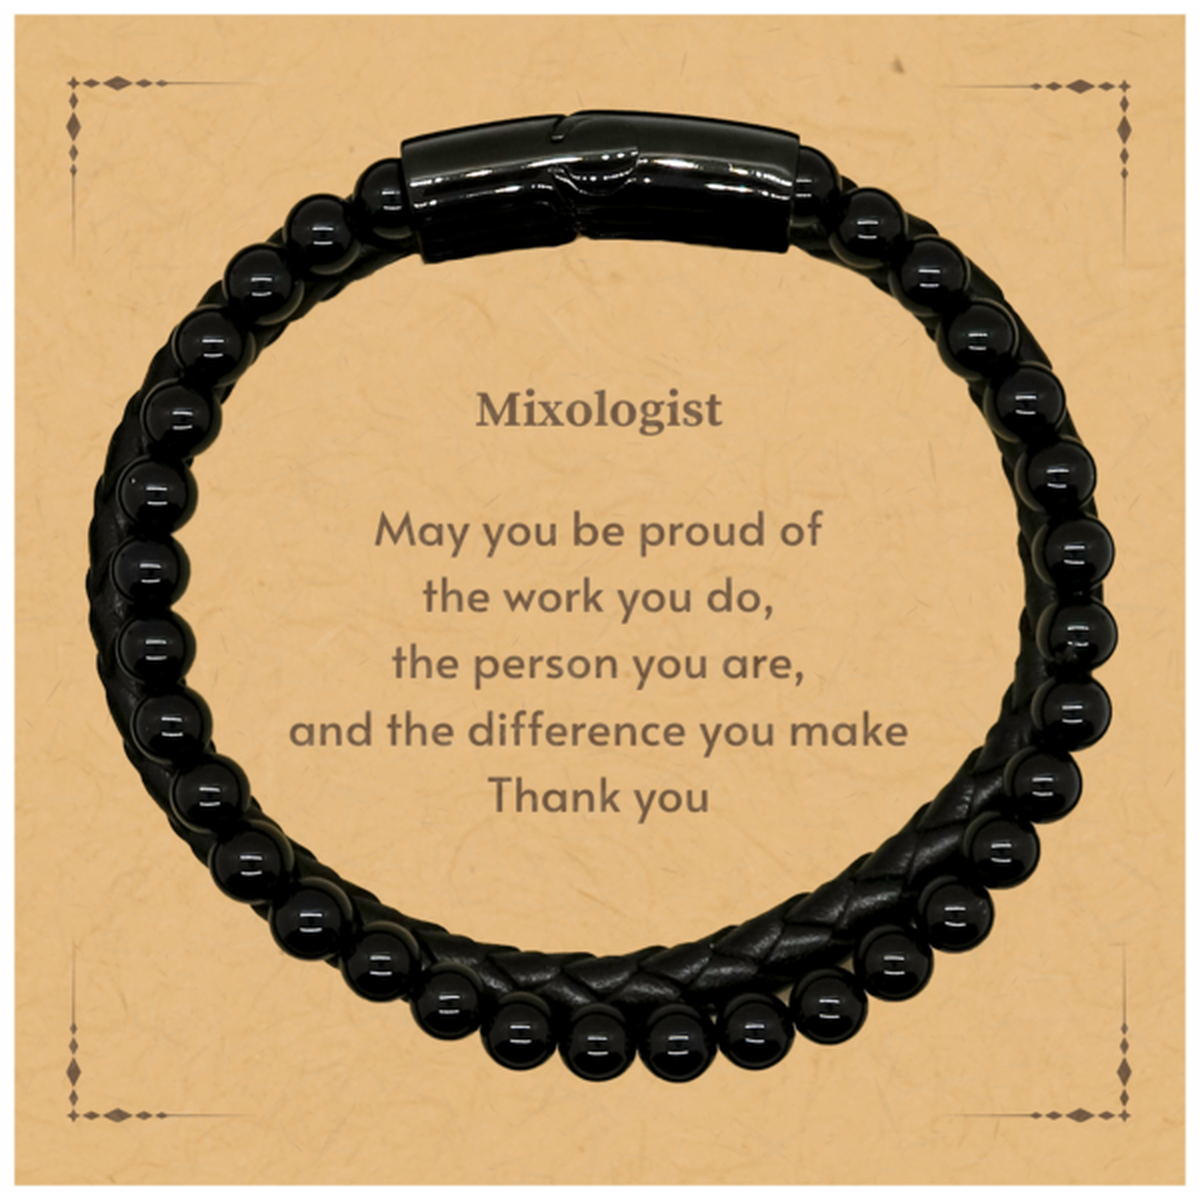 Heartwarming Stone Leather Bracelets Retirement Coworkers Gifts for Mixologist, Mixologist May You be proud of the work you do, the person you are Gifts for Boss Men Women Friends